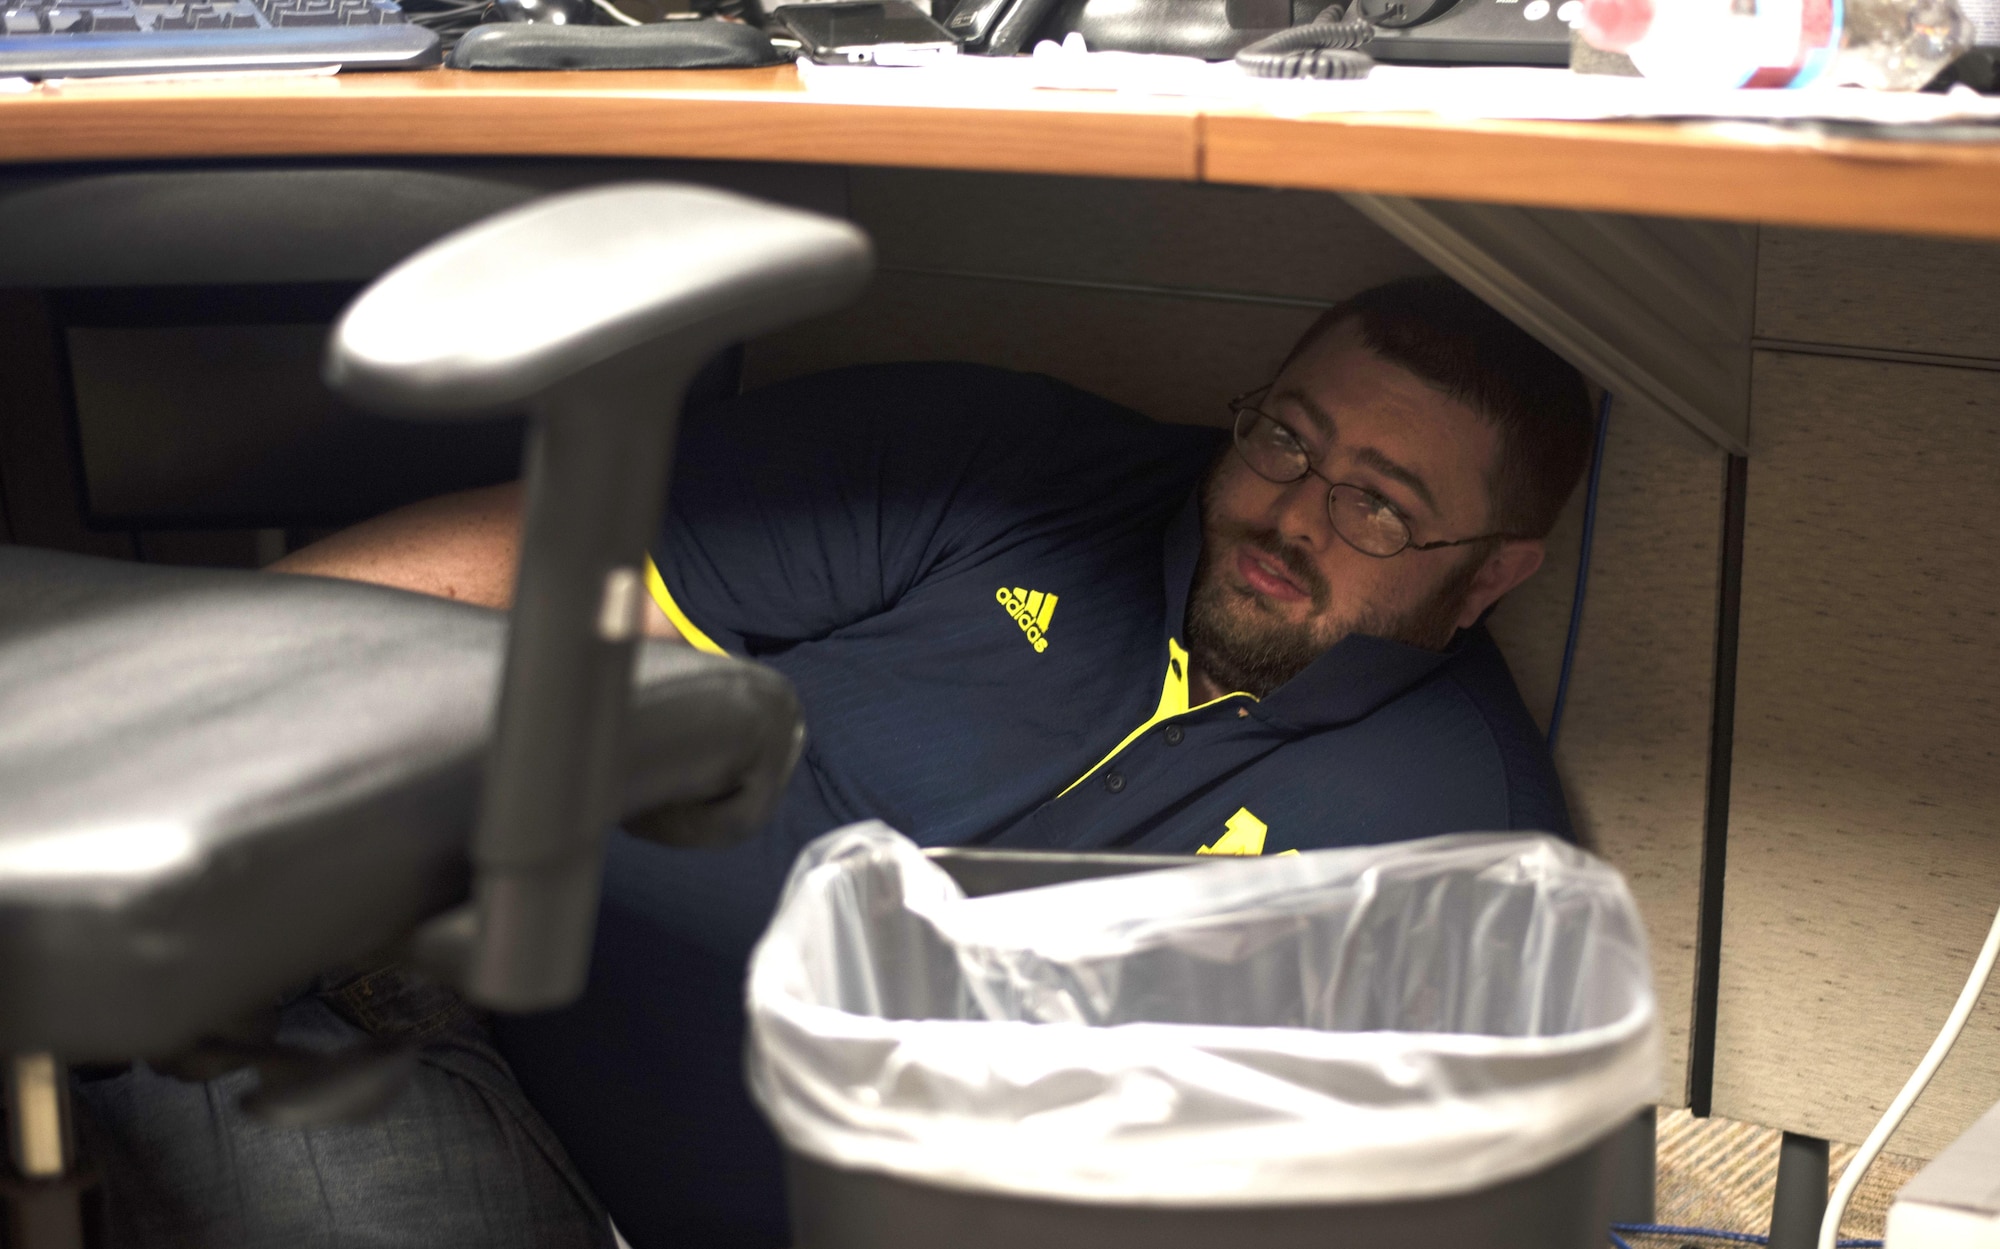 A member of the 927th Air Refueling Wing, hides under his desk after shots were fired during an active shooter exercise at MacDill Air Force Base, Fla., April 17, 2017. During this scenario, service members are advised to seek shelter and barricade themselves in offices to hide from the shooter. (U.S. Air Force photo by Airman 1st Class Adam R. Shanks)